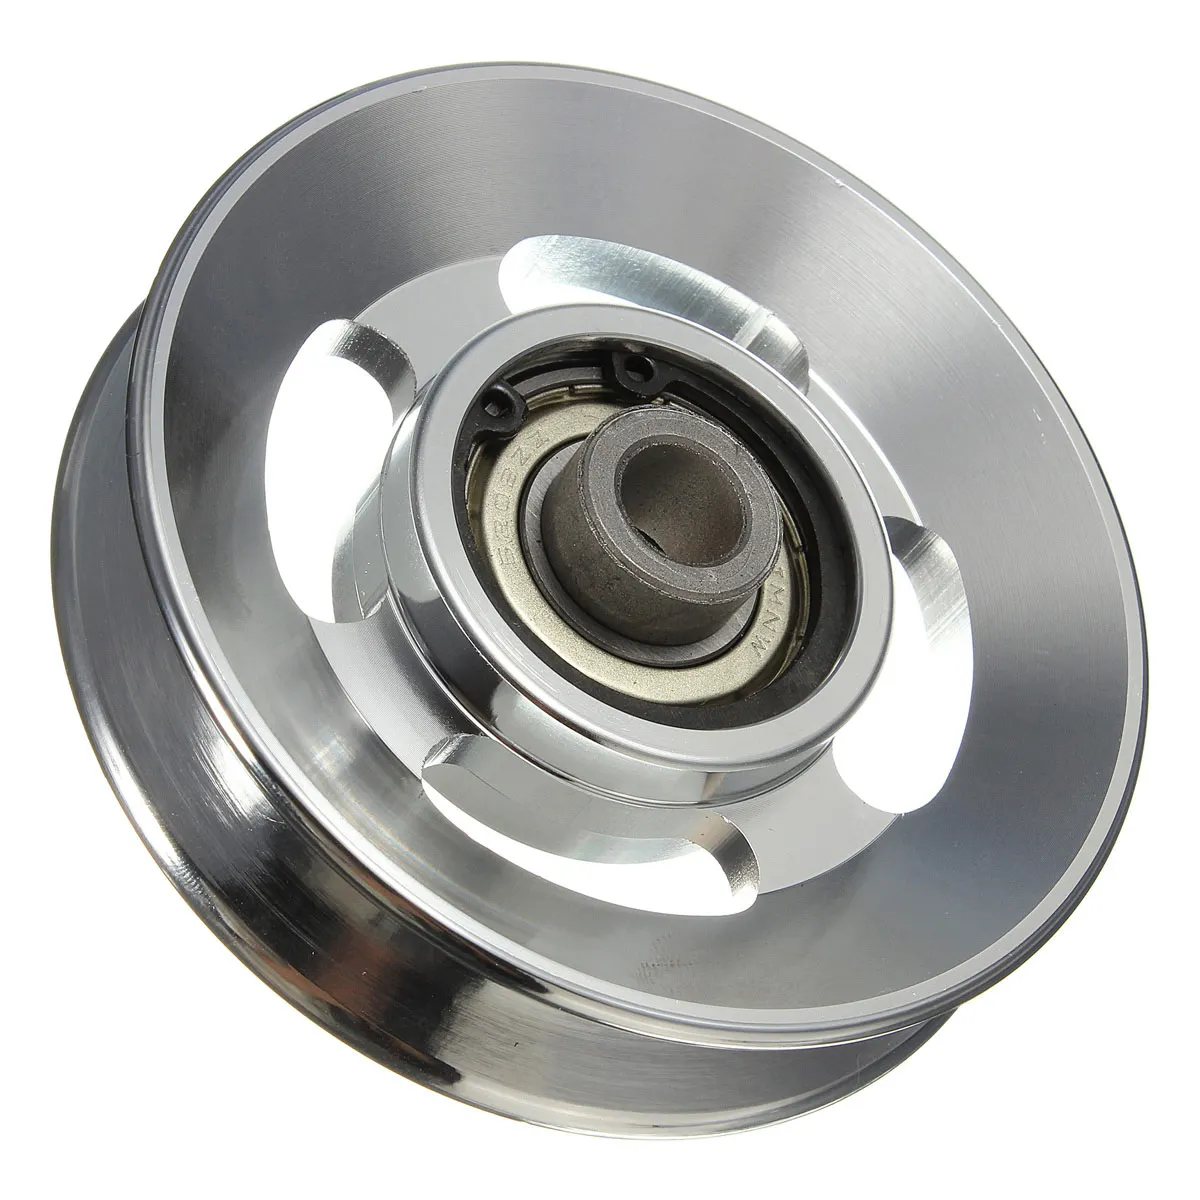 Bearing Pulley Wheel For Cable Gym Fitness Training Exercise Equipment Part 